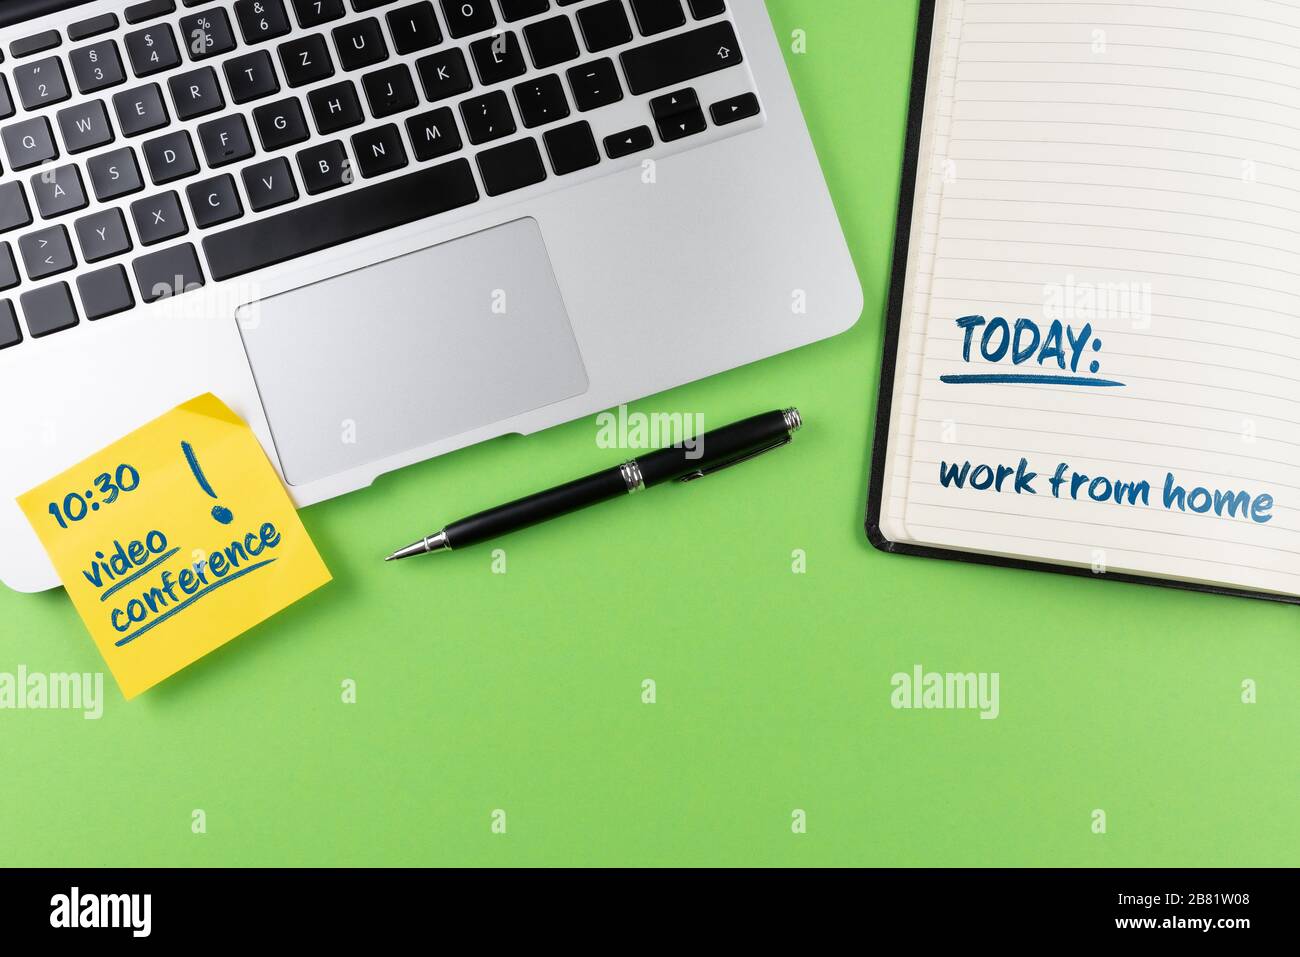 working from home and home office concept, laptop and notepad on desk with video conference reminder Stock Photo